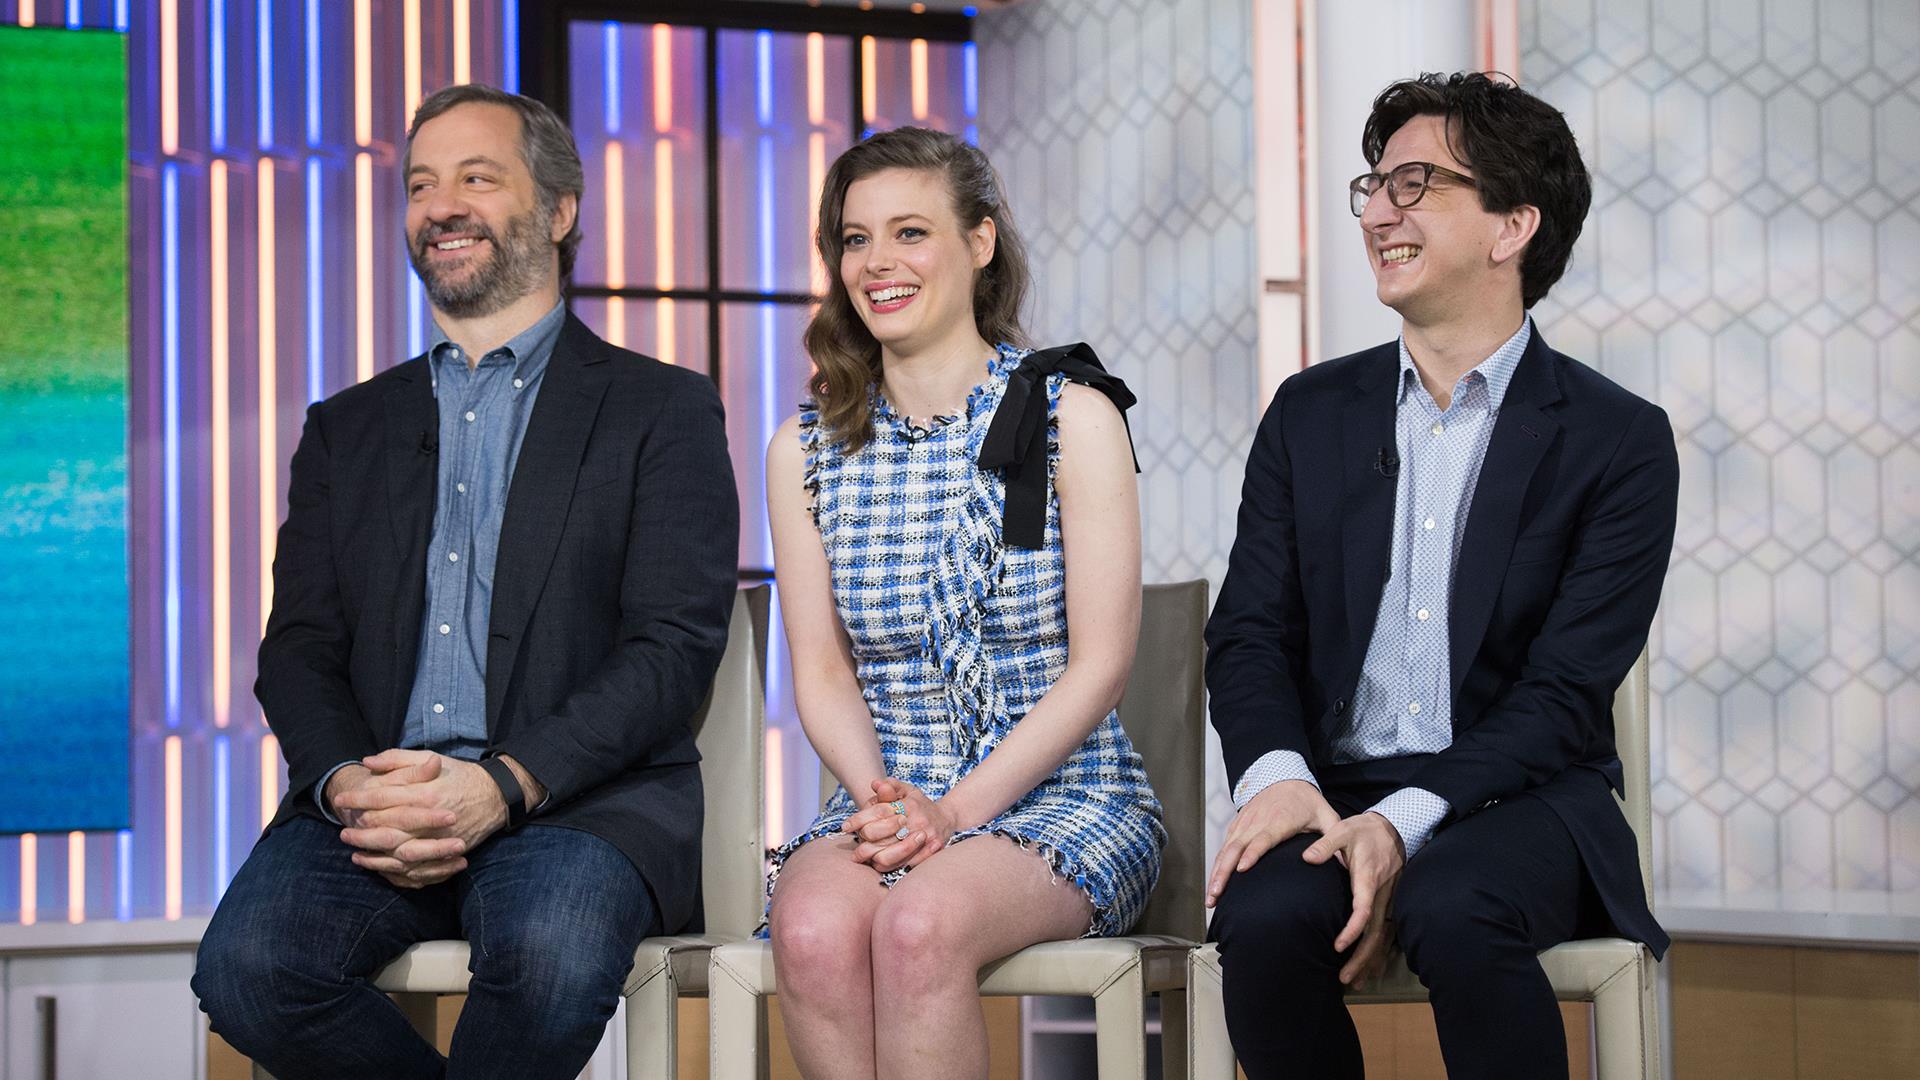 Judd Apatow: I want to host 'The Apprentice'